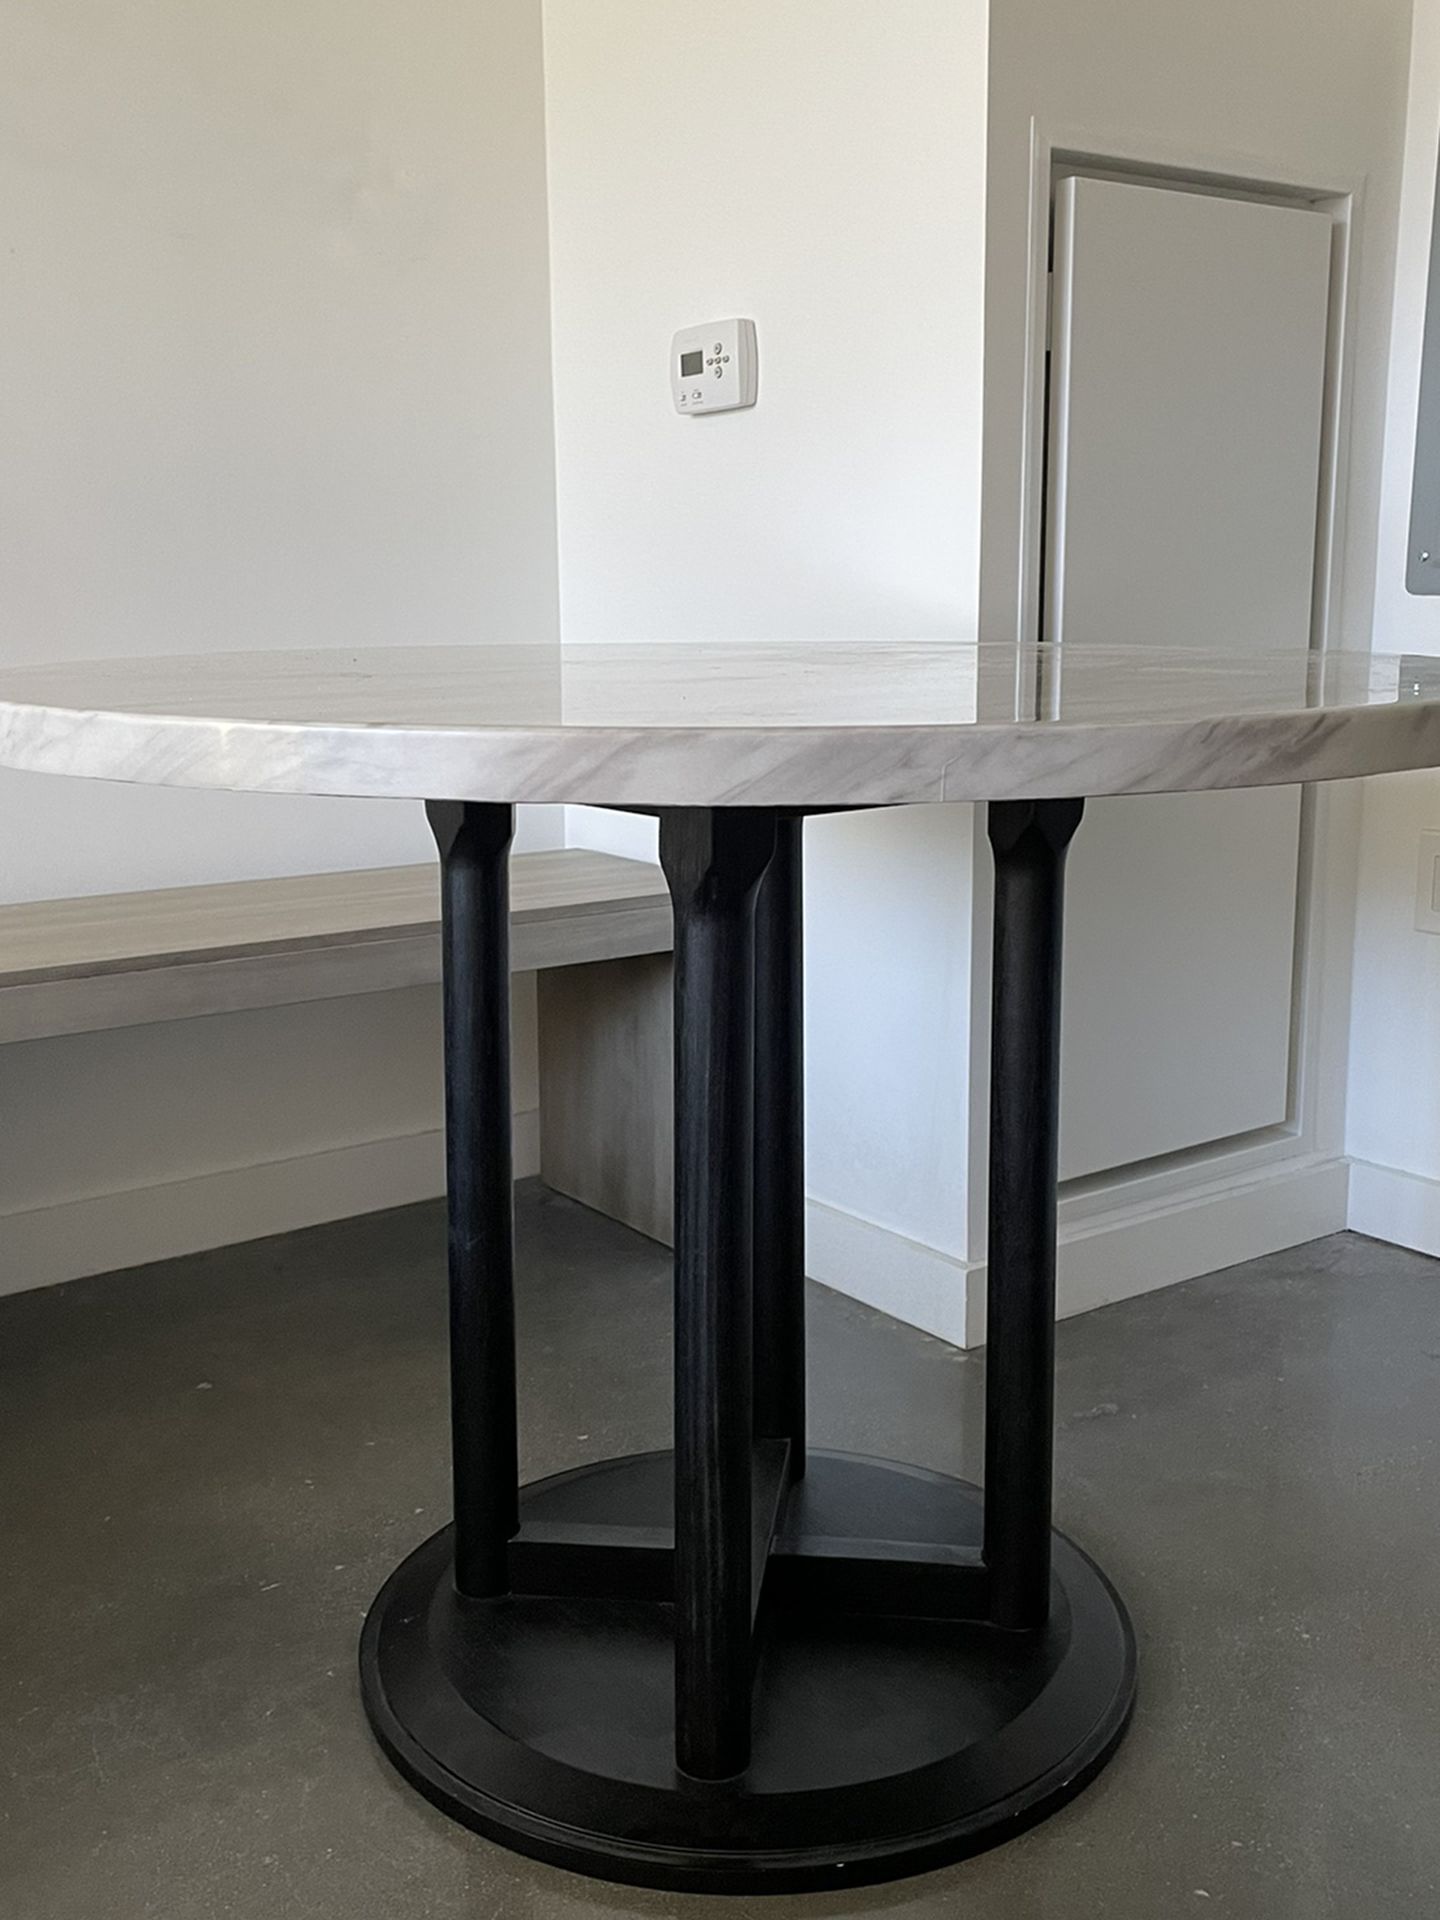 Round Marble Dining Table